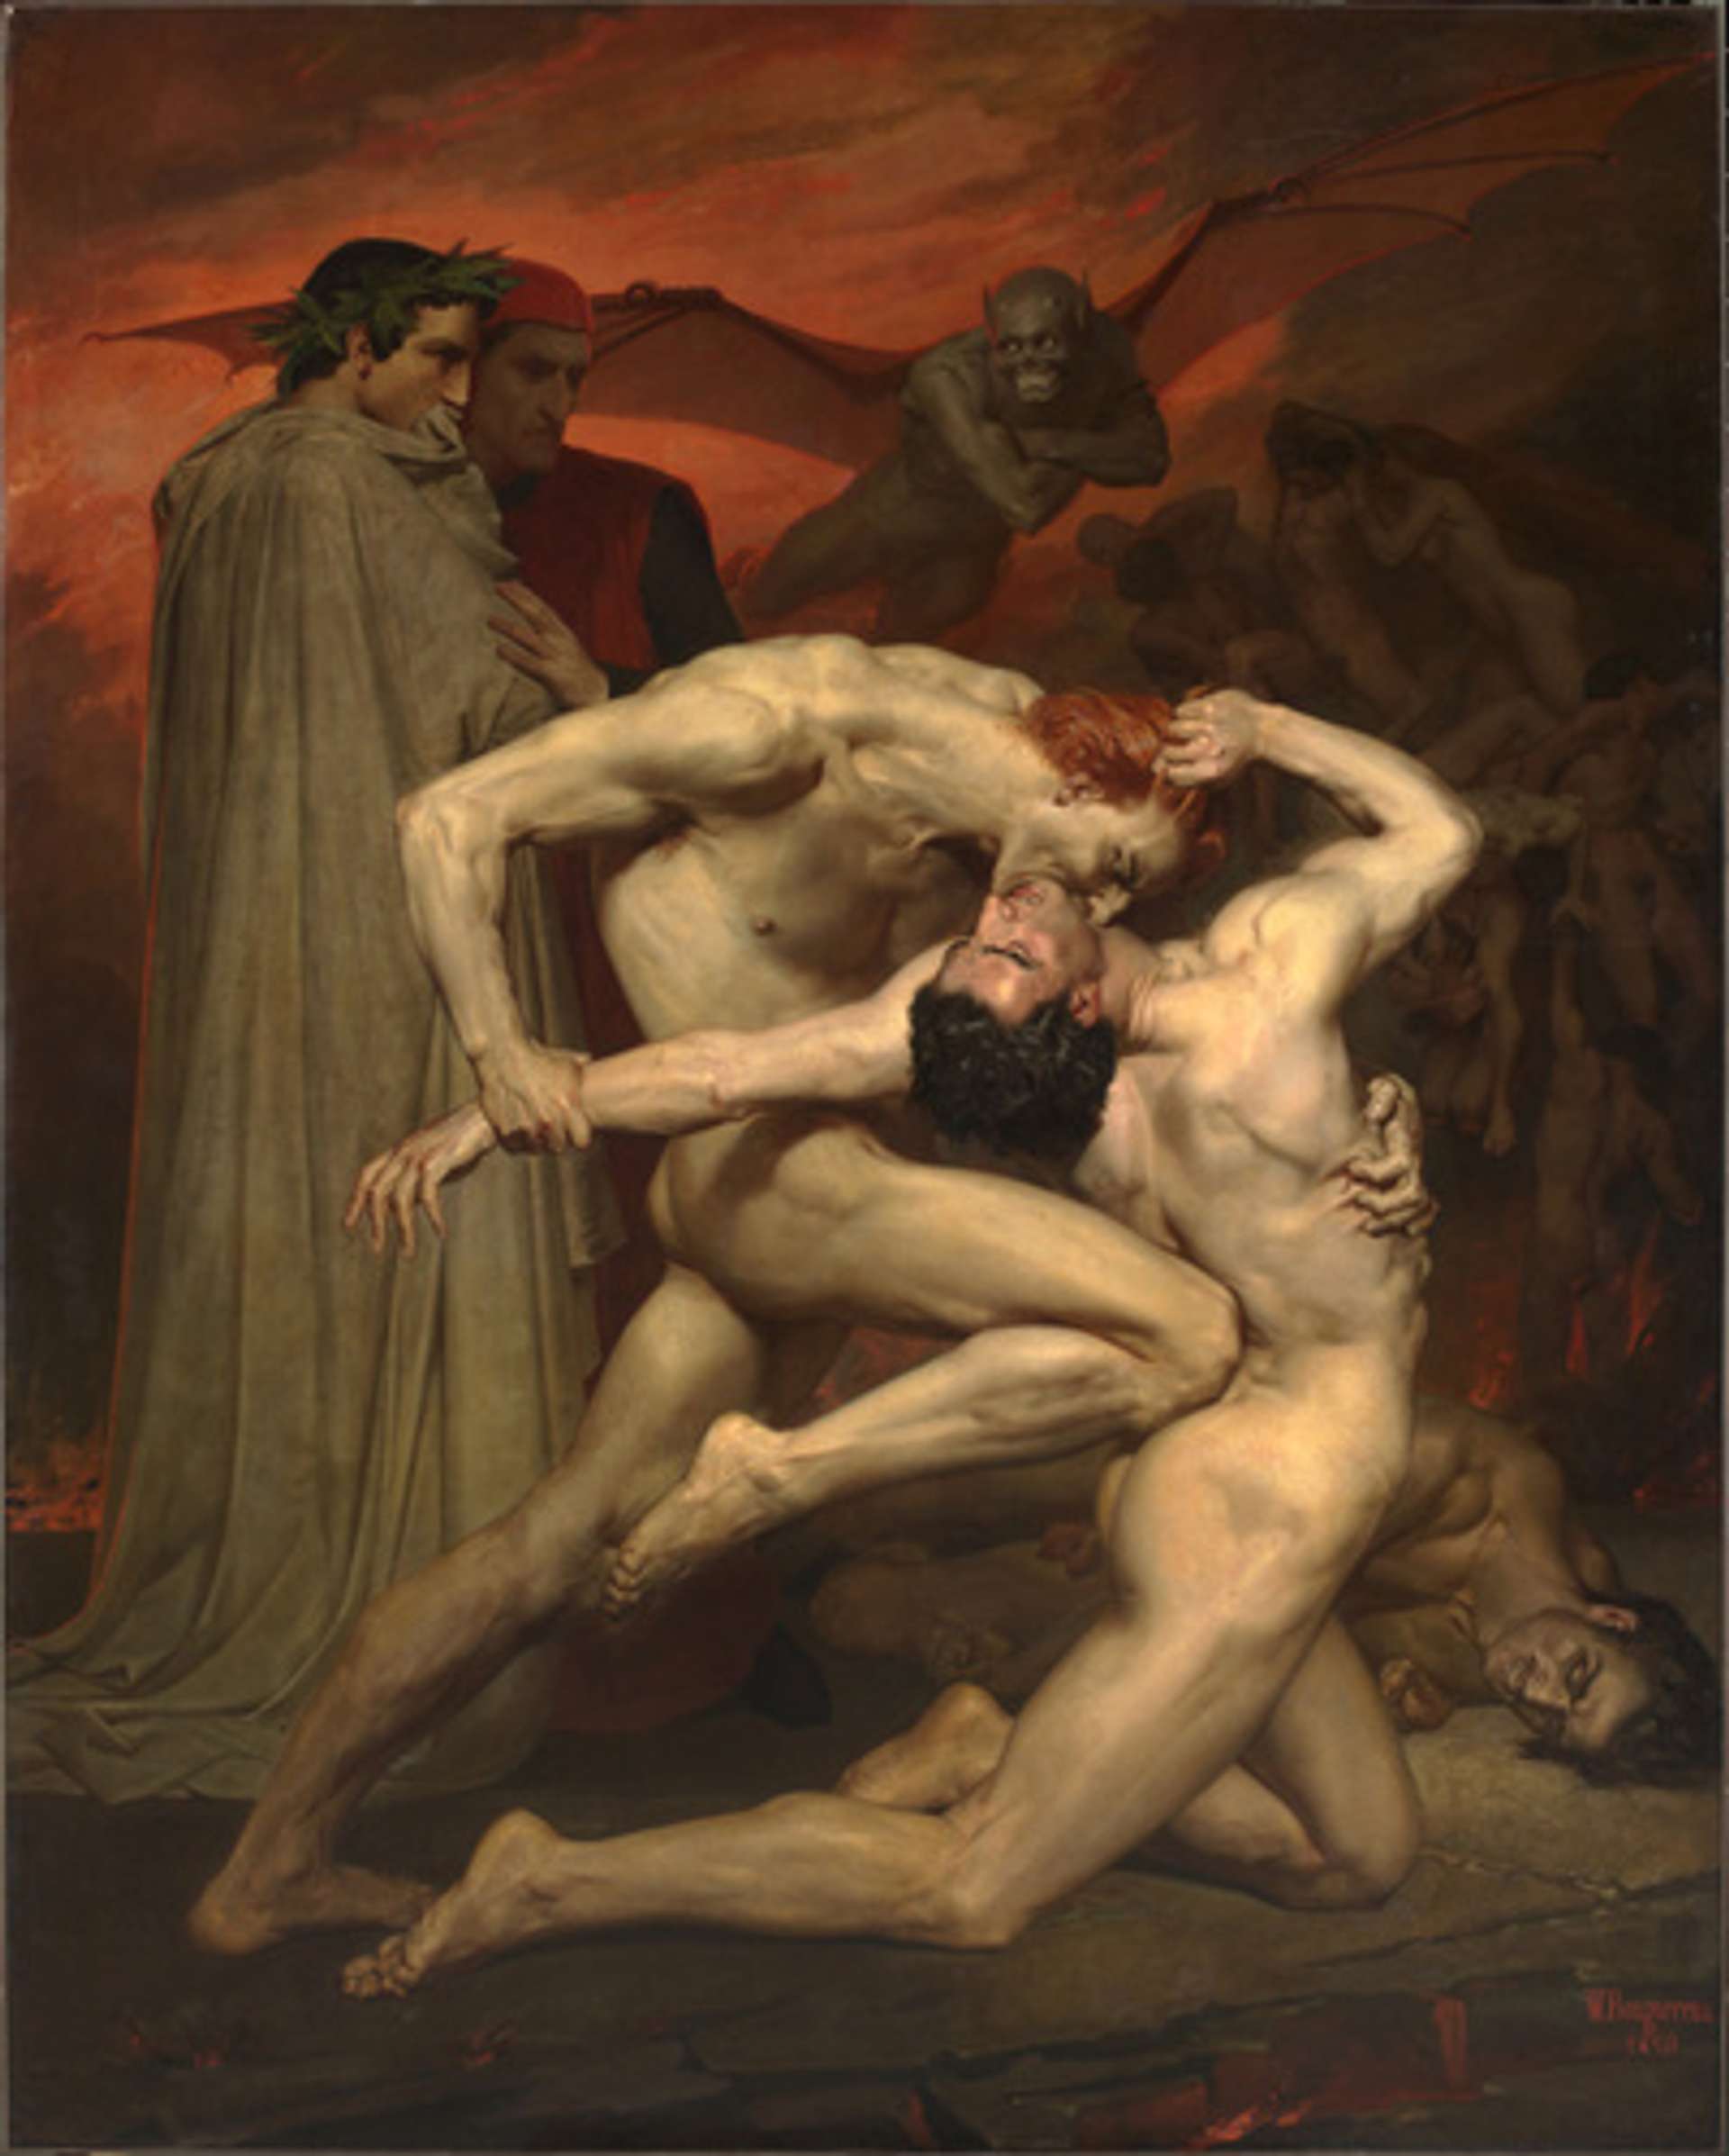  A painting depicting two intertwined naked male bodies. One man with brown hair kneels while another standing man with red hair pulls his left arm backwards, pressing his knee against his lower back. The scene suggests a sacrificial gesture as the man's neck is bent in an unconventional manner.